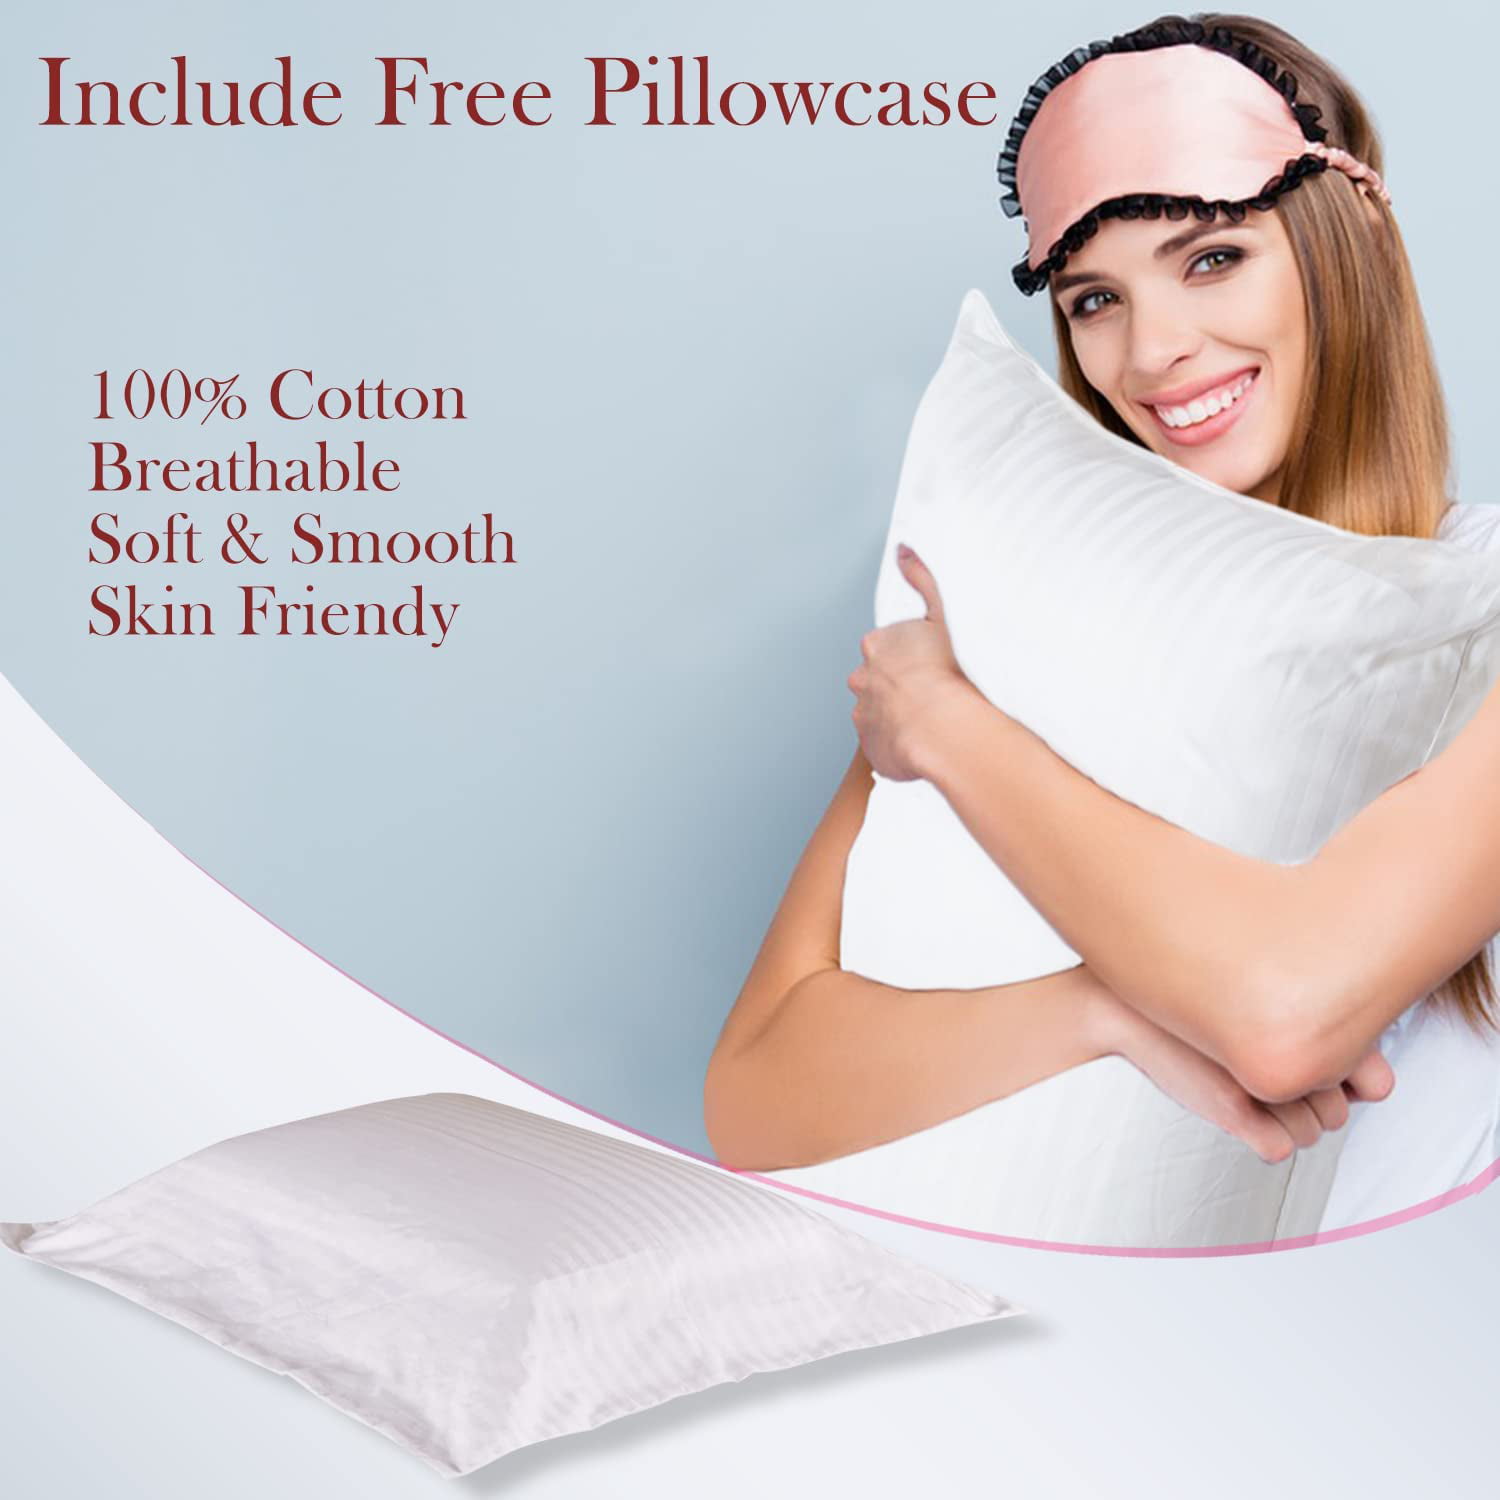 LUXOME Layr Adjustable Firmness & Loft Pillow - Completely Customizable - Memory Foam - Cooling Cover - King